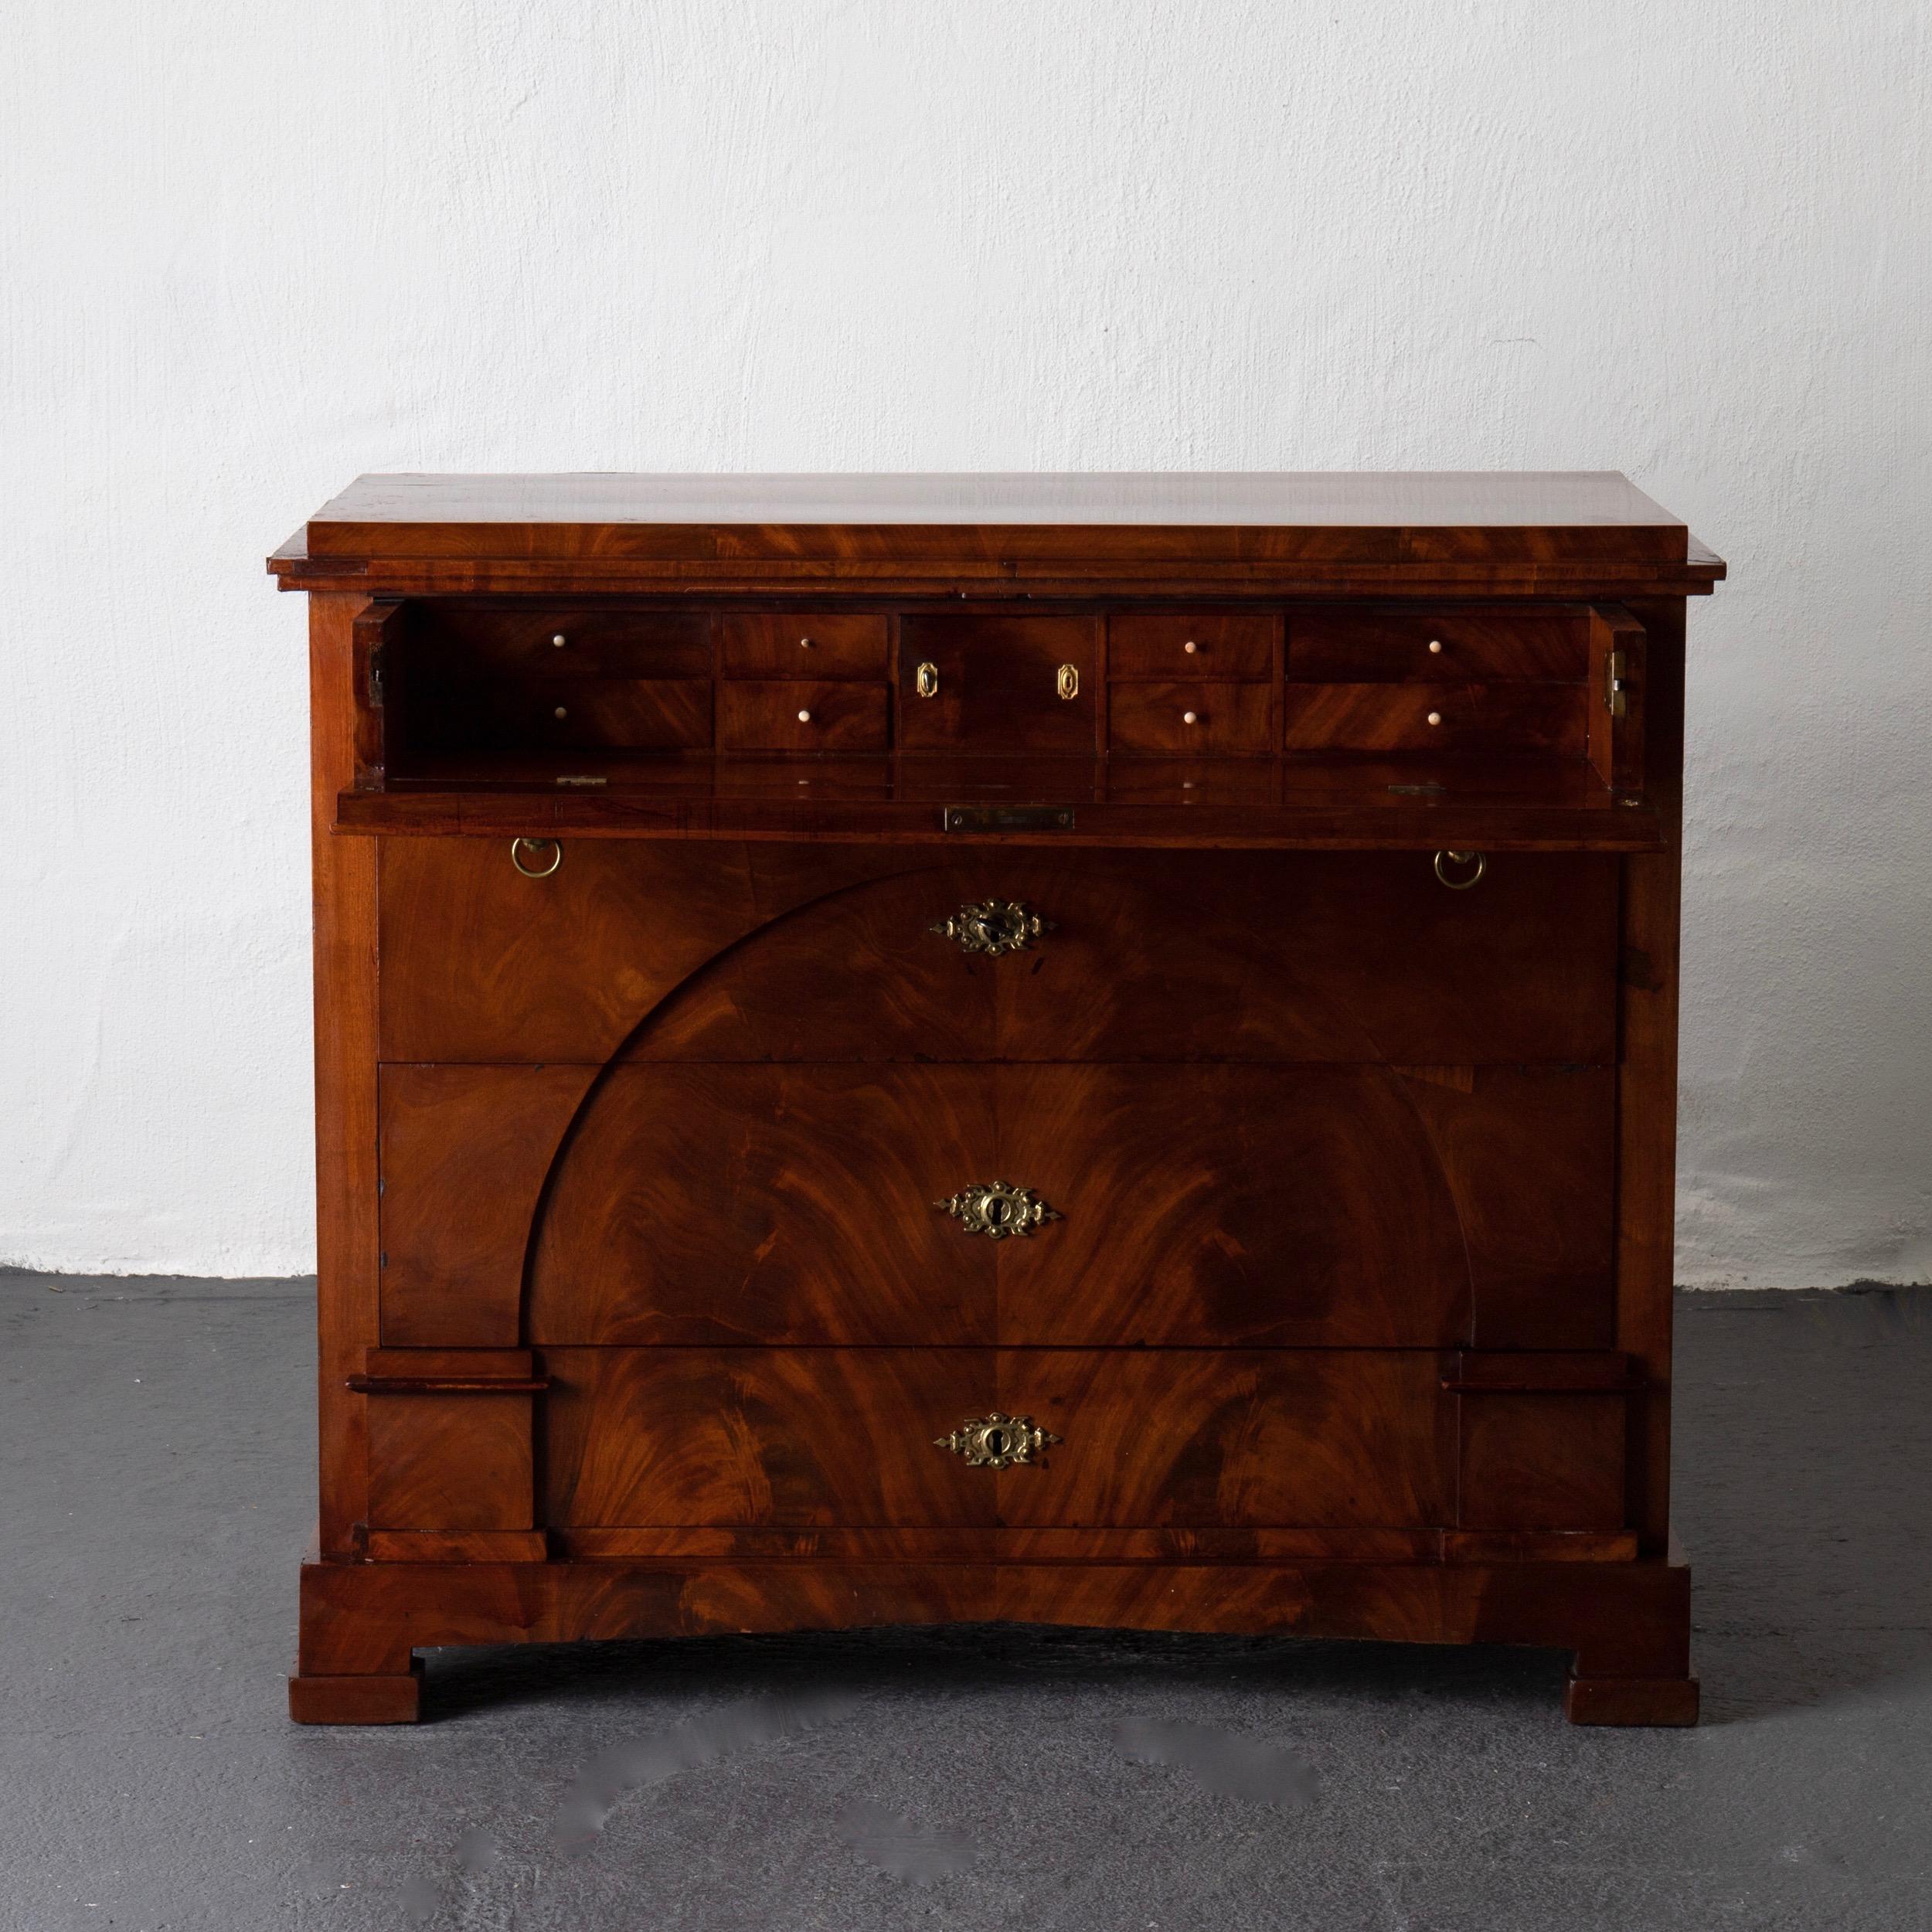 A beautiful chest of drawers made during the Empire period (1810-1830) in Sweden. Signed ABO. Veneered in mahogany decorated with details significant for the period. Brass hardware.

  